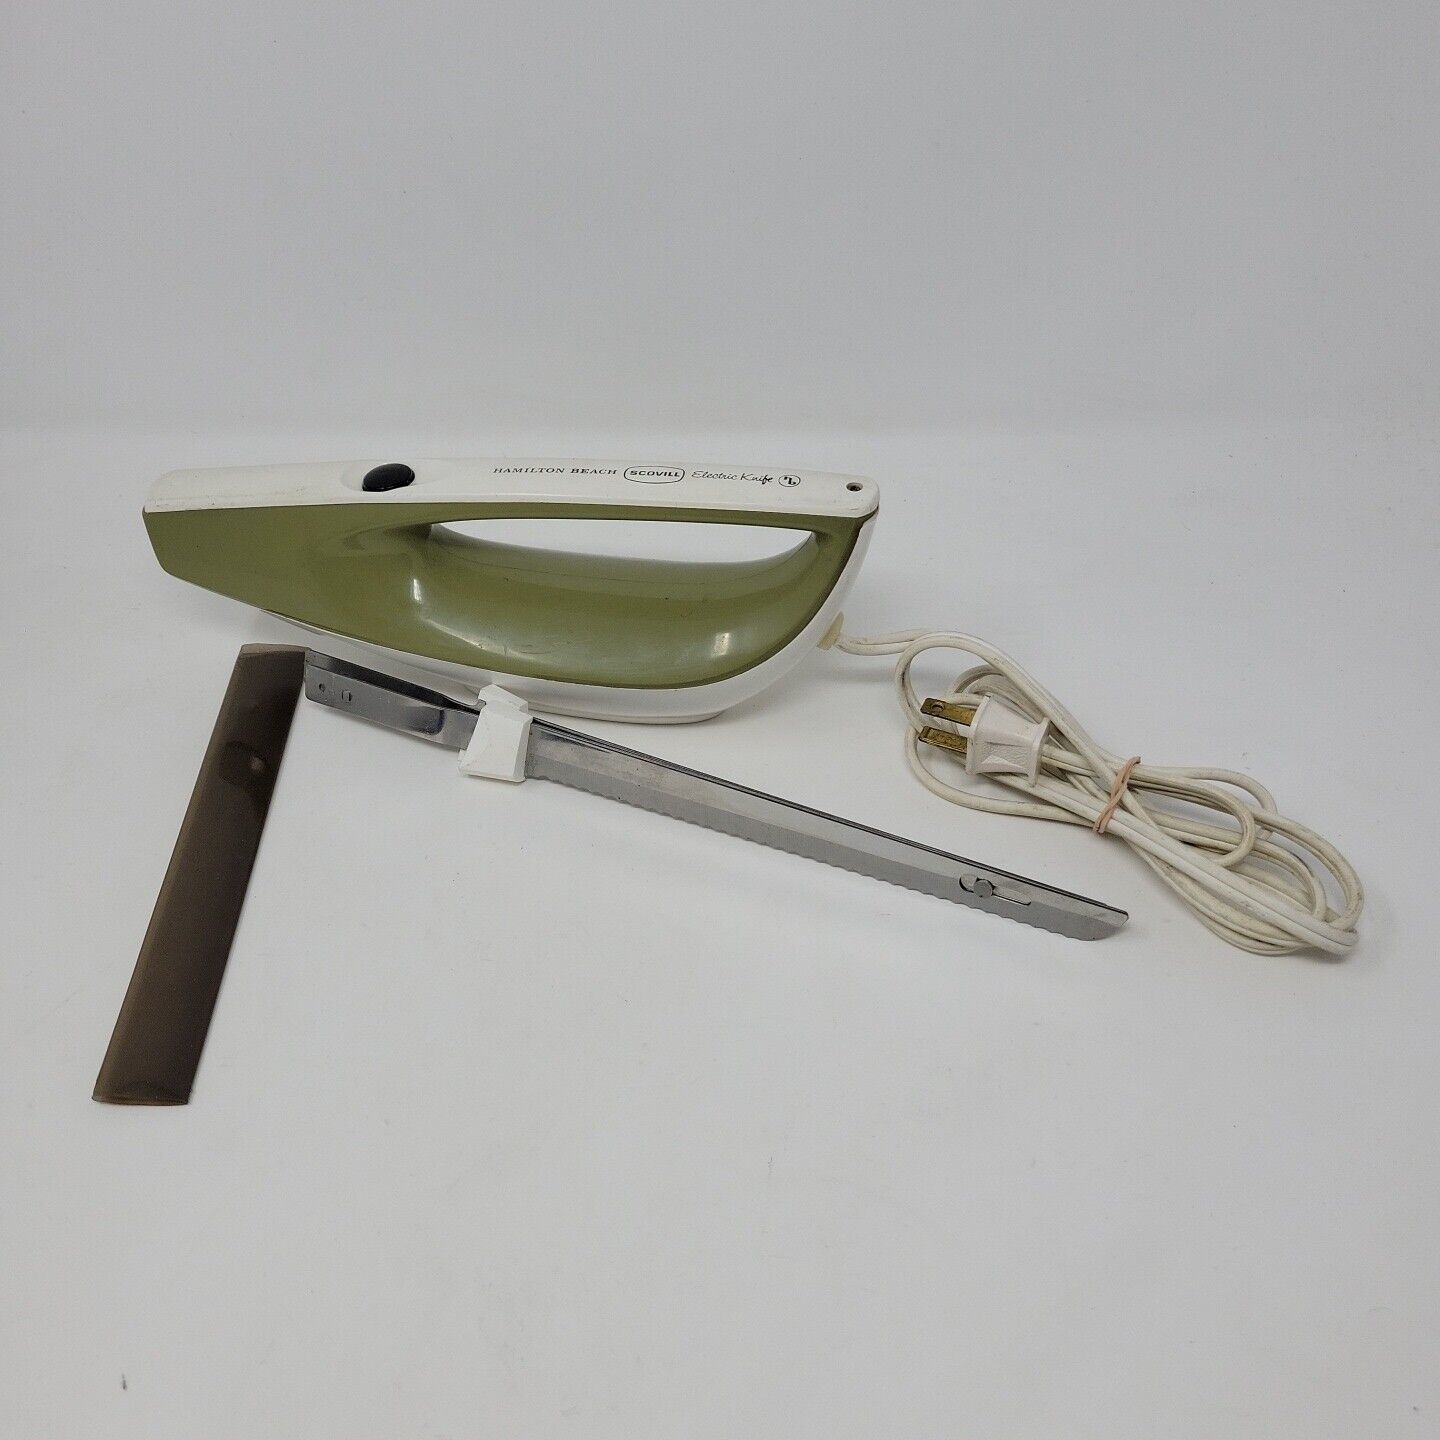 Primary image for Vintage Hamilton Beach Avocado Green Electric Carving Knife Scovill 275A Tested